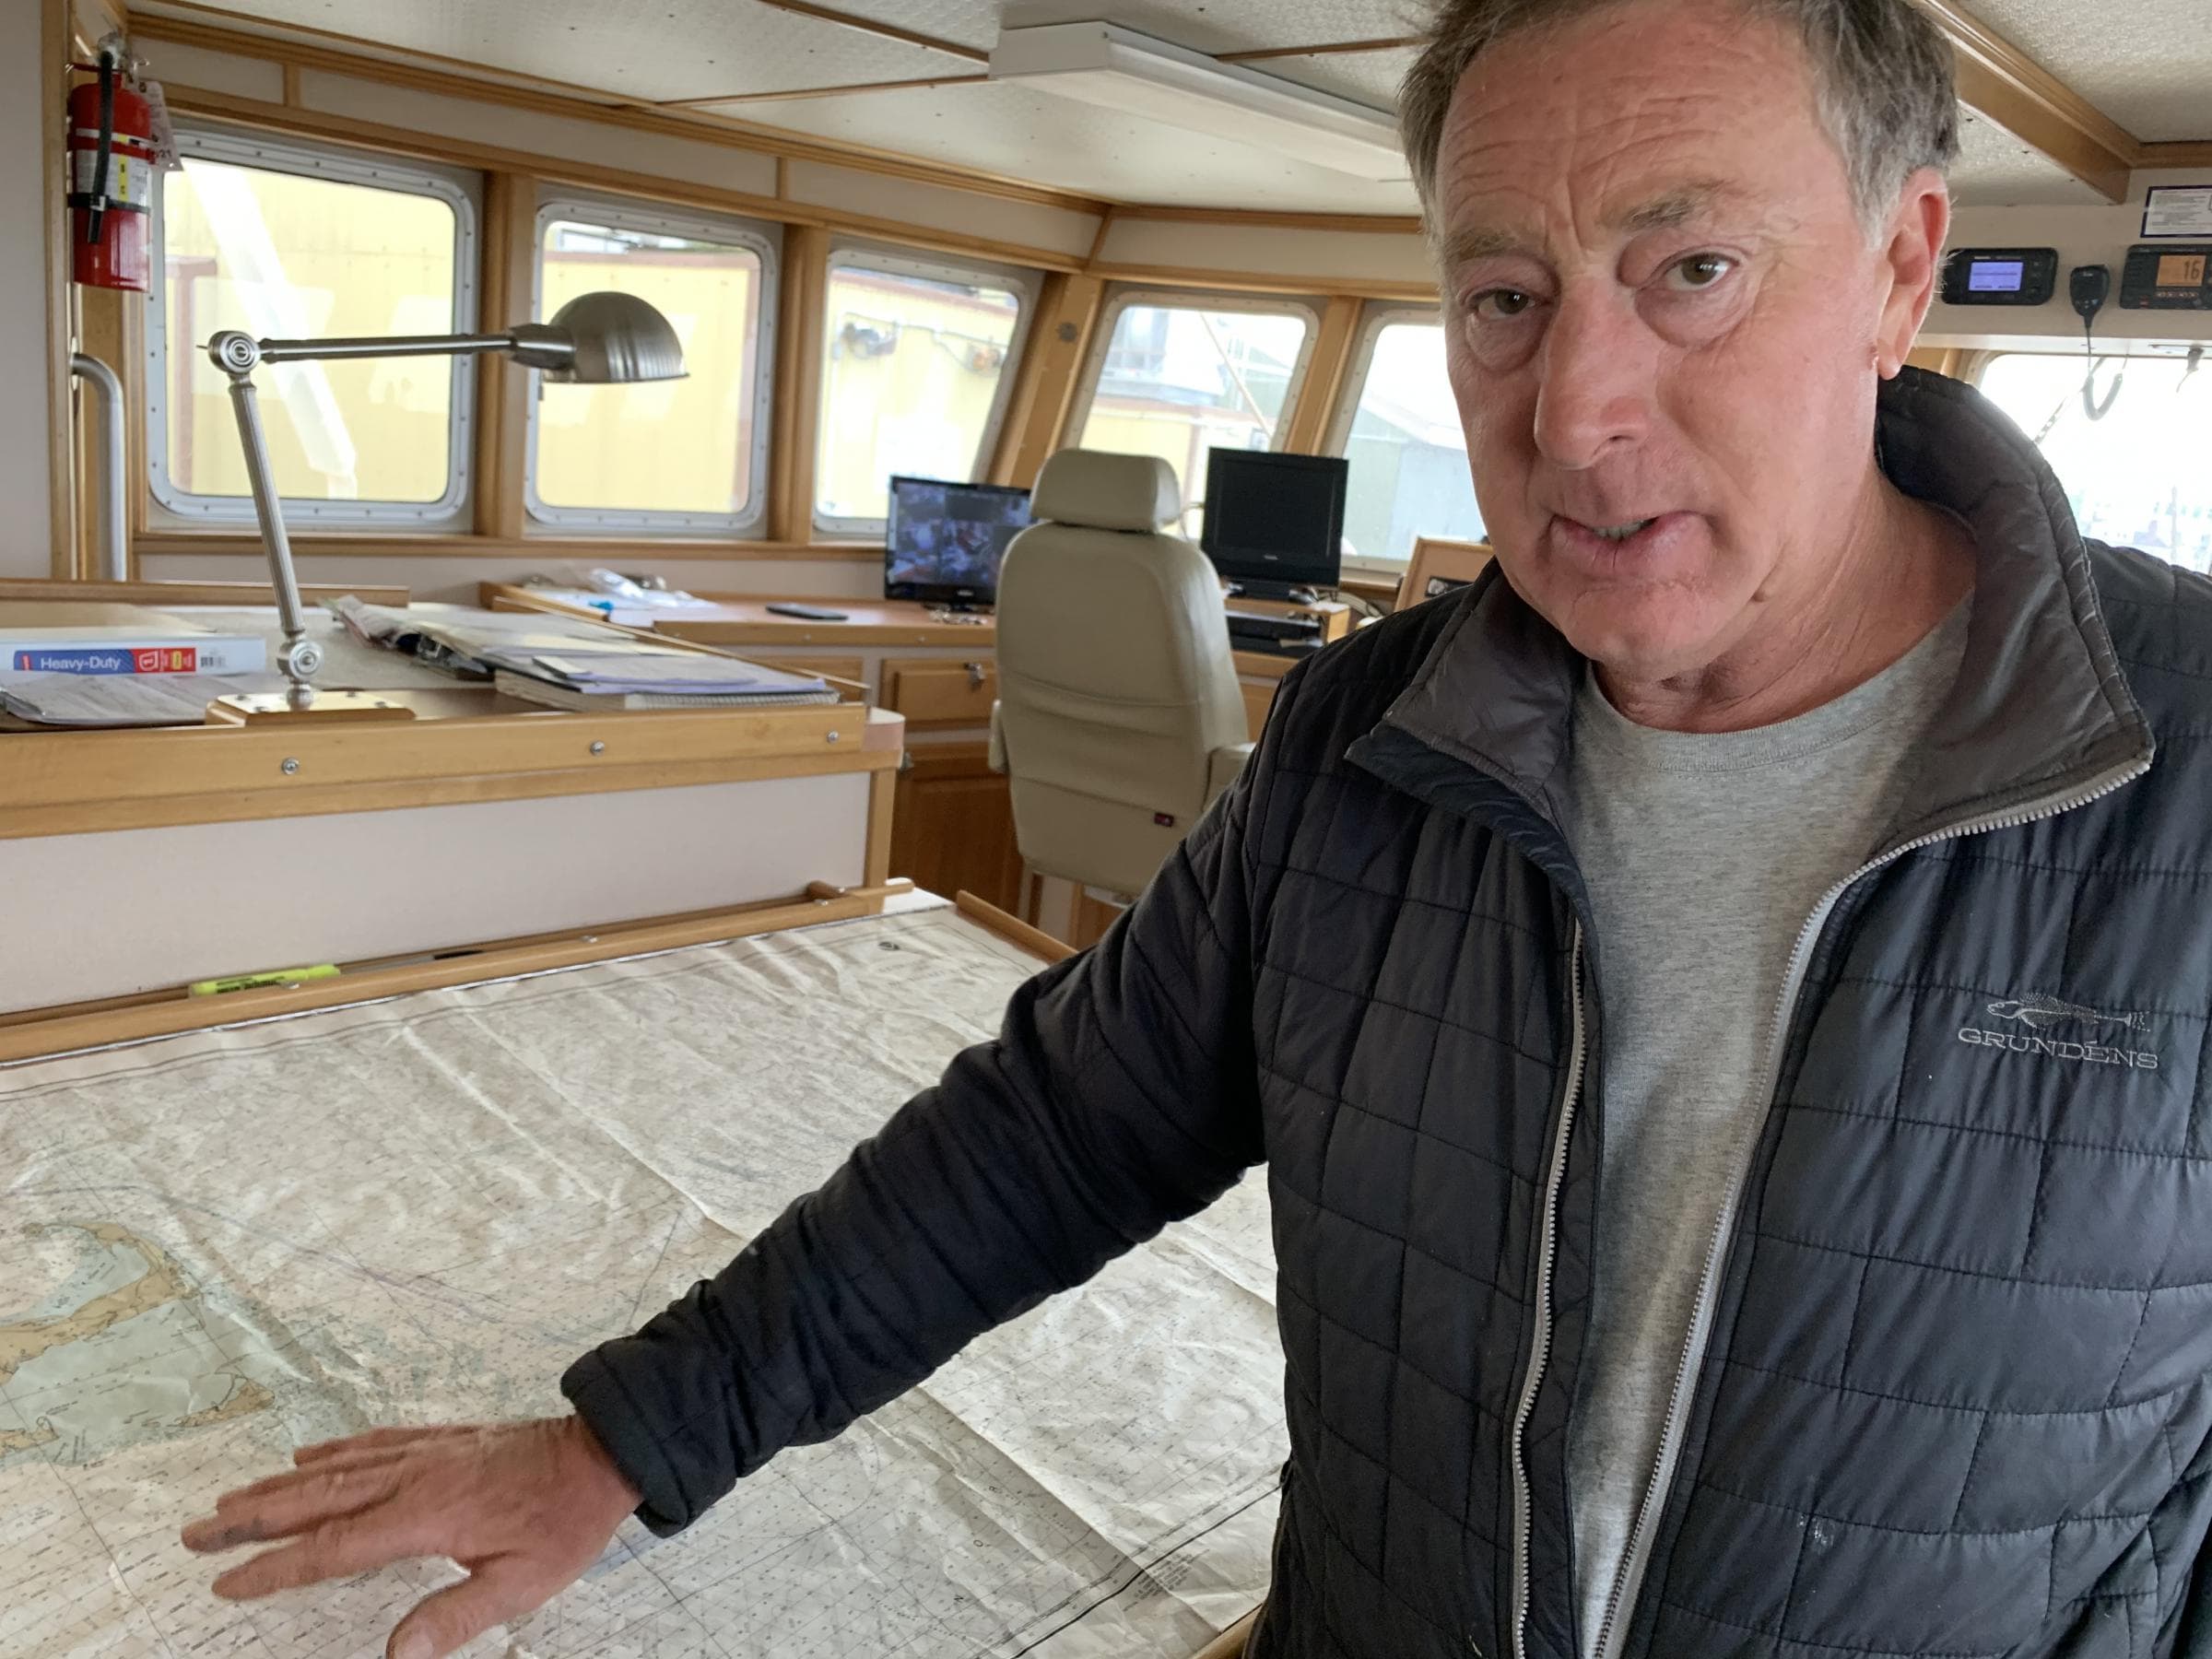 In the wheelhouse of the Furious, owner Joe Gilbert indicates where future planned wind farms will impact fishing grounds. (Harriet Jones/Connecticut Public Radio)